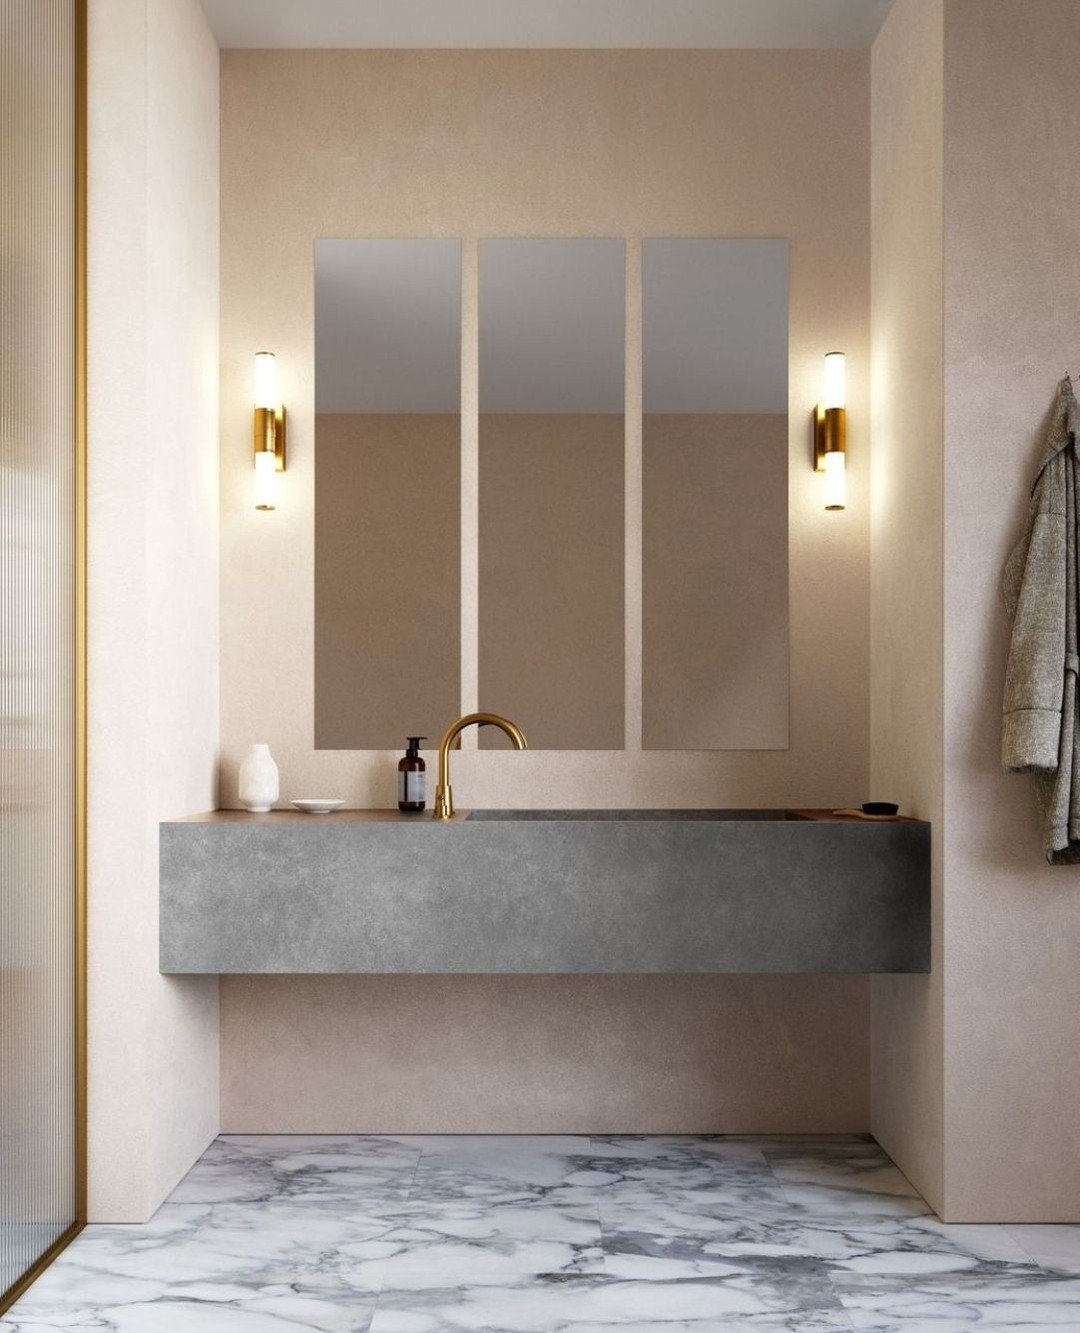 Create a sense of relaxation and balance in your bathroom with this custom luxury concrete basin, designed to fit in effortlessly.⁠
⁠
Looking for a custom concrete sink or basin? Get in touch with our team to inquire.